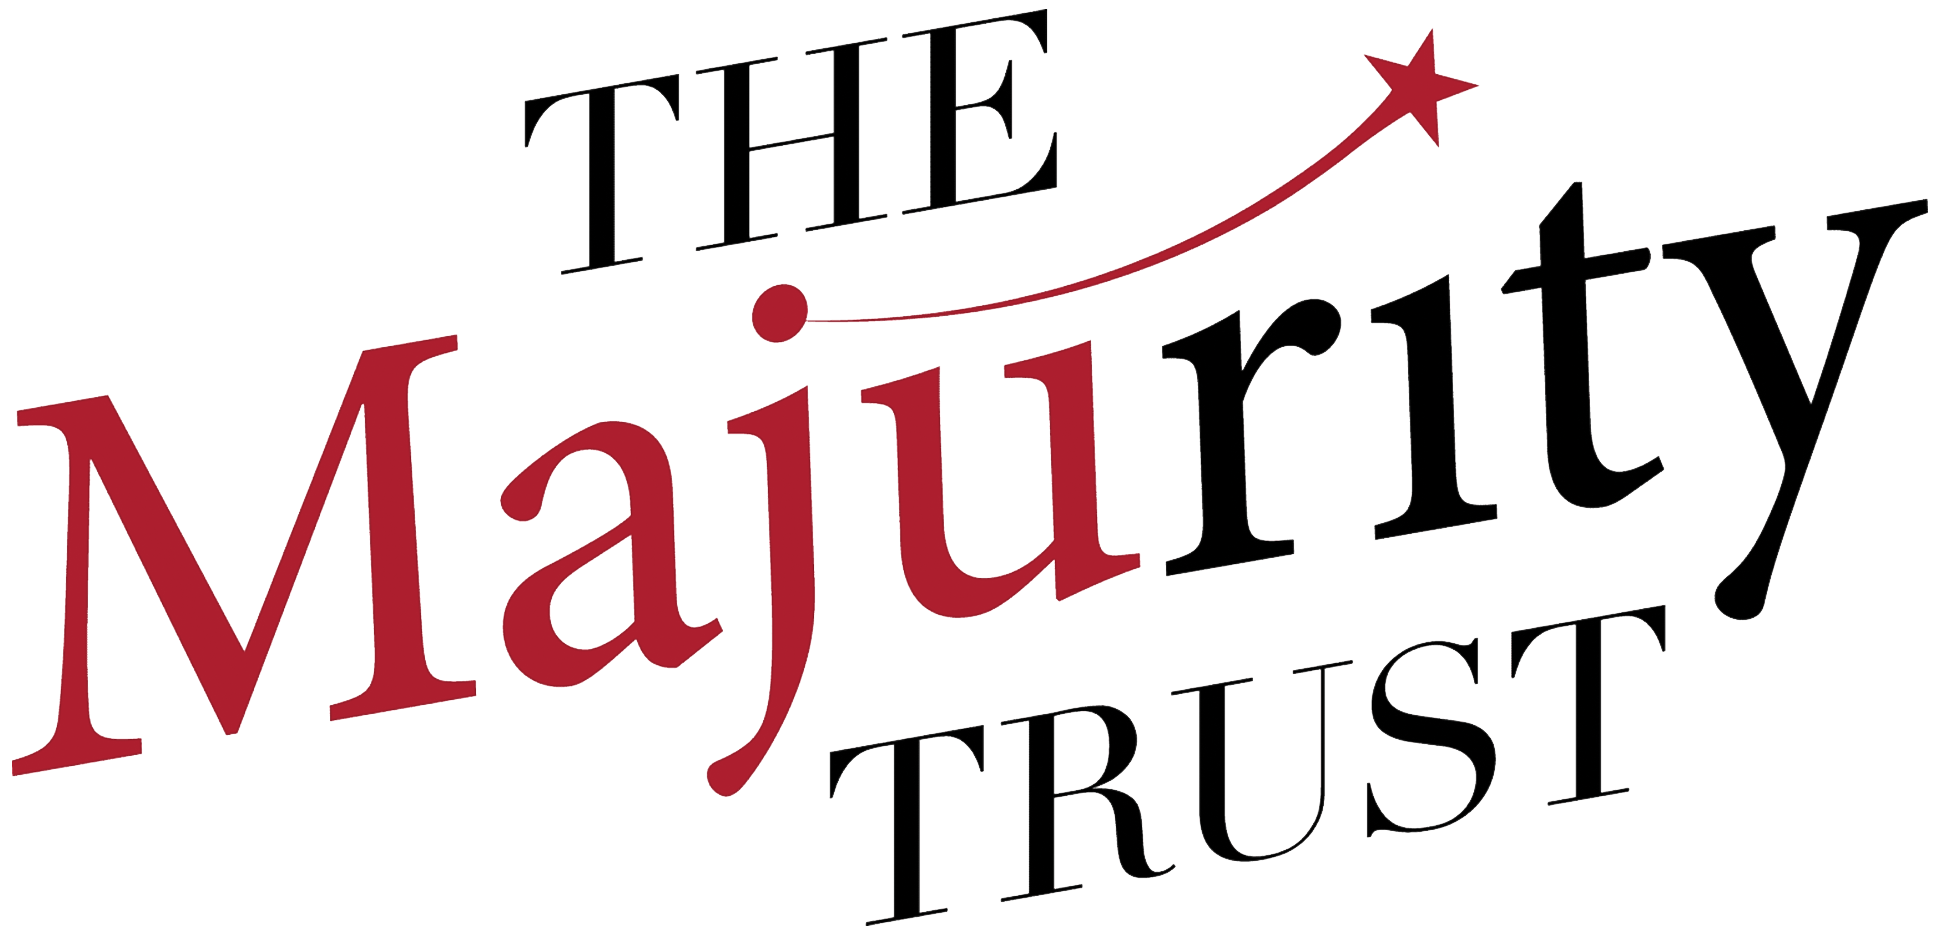 This logo of Majurity features the words ‘THE Majurity TRUST’ in predominantly black serif typeface; only the letters ‘Maju’ are in red, with a star connected by a curve to the ‘j’.